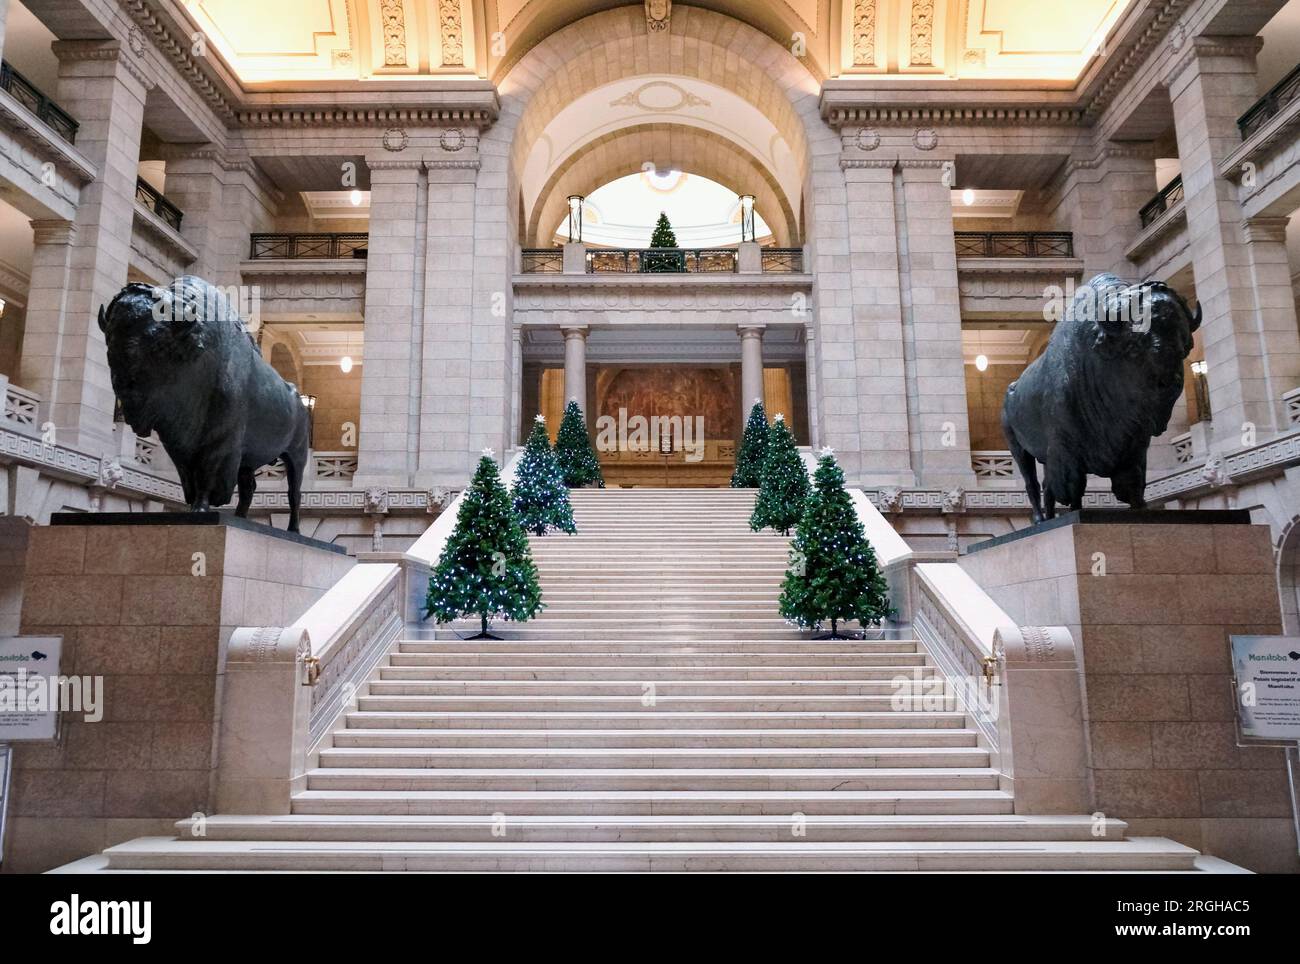 Winnipeg, Manitoba, Canada - 2014-11-21: Part of the interior of Manitoba Legislature building with two life sized bison statues at the base of the Stock Photo